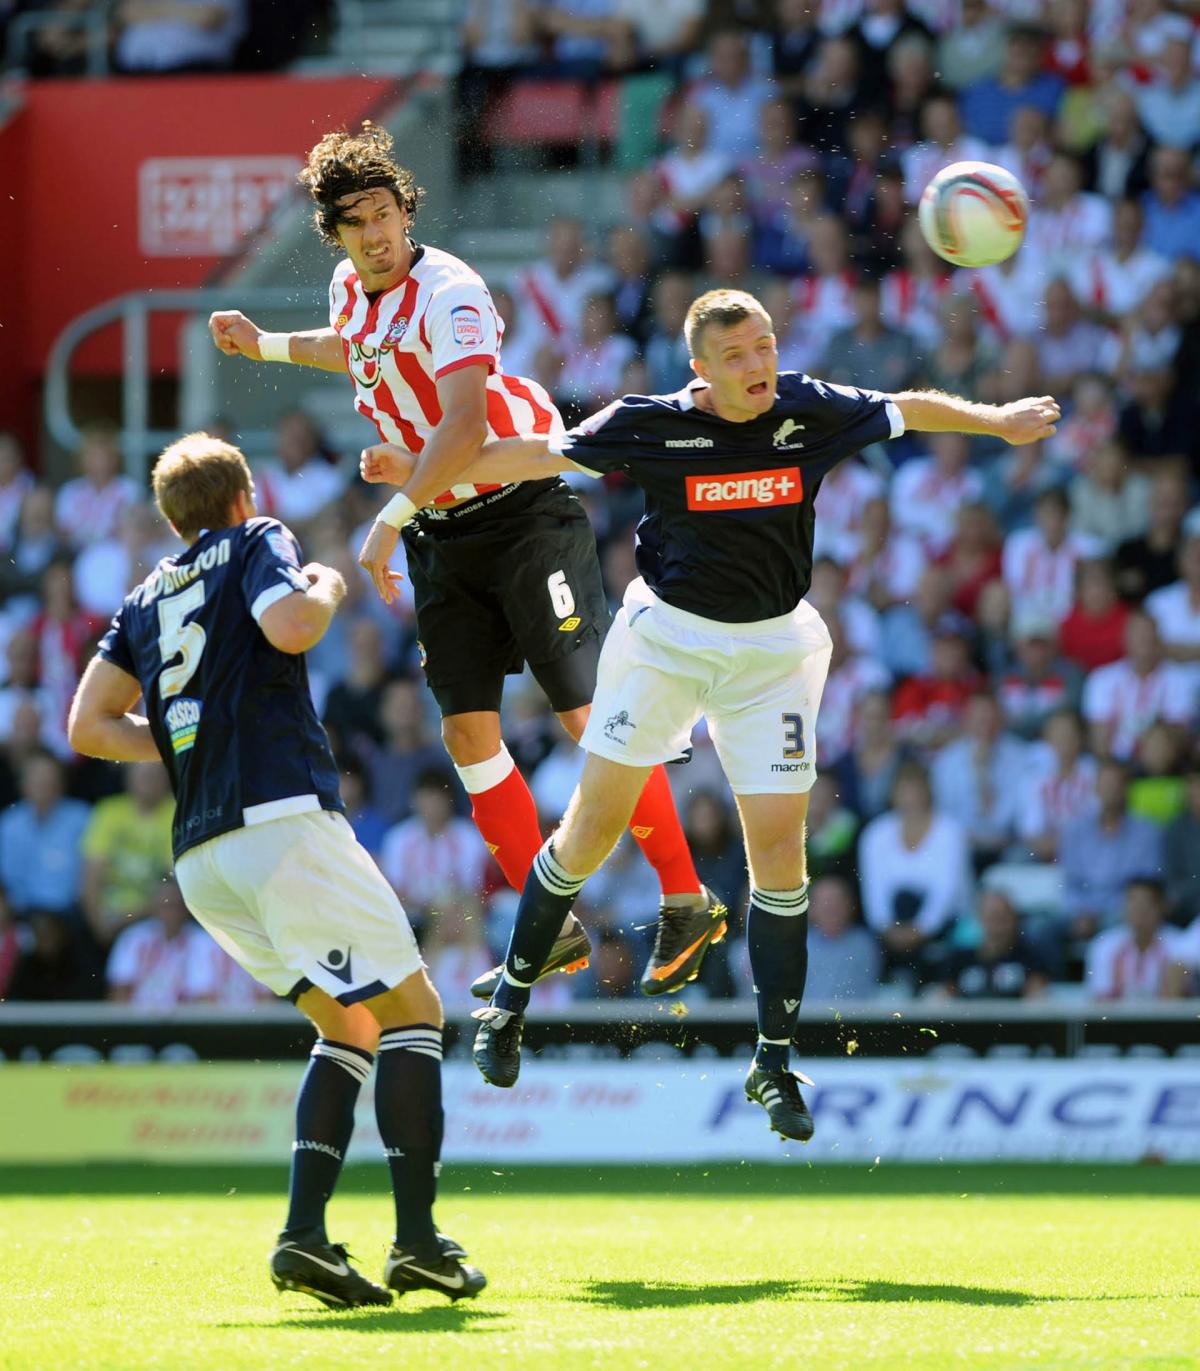 Jose Fonte's Saints career in pictures